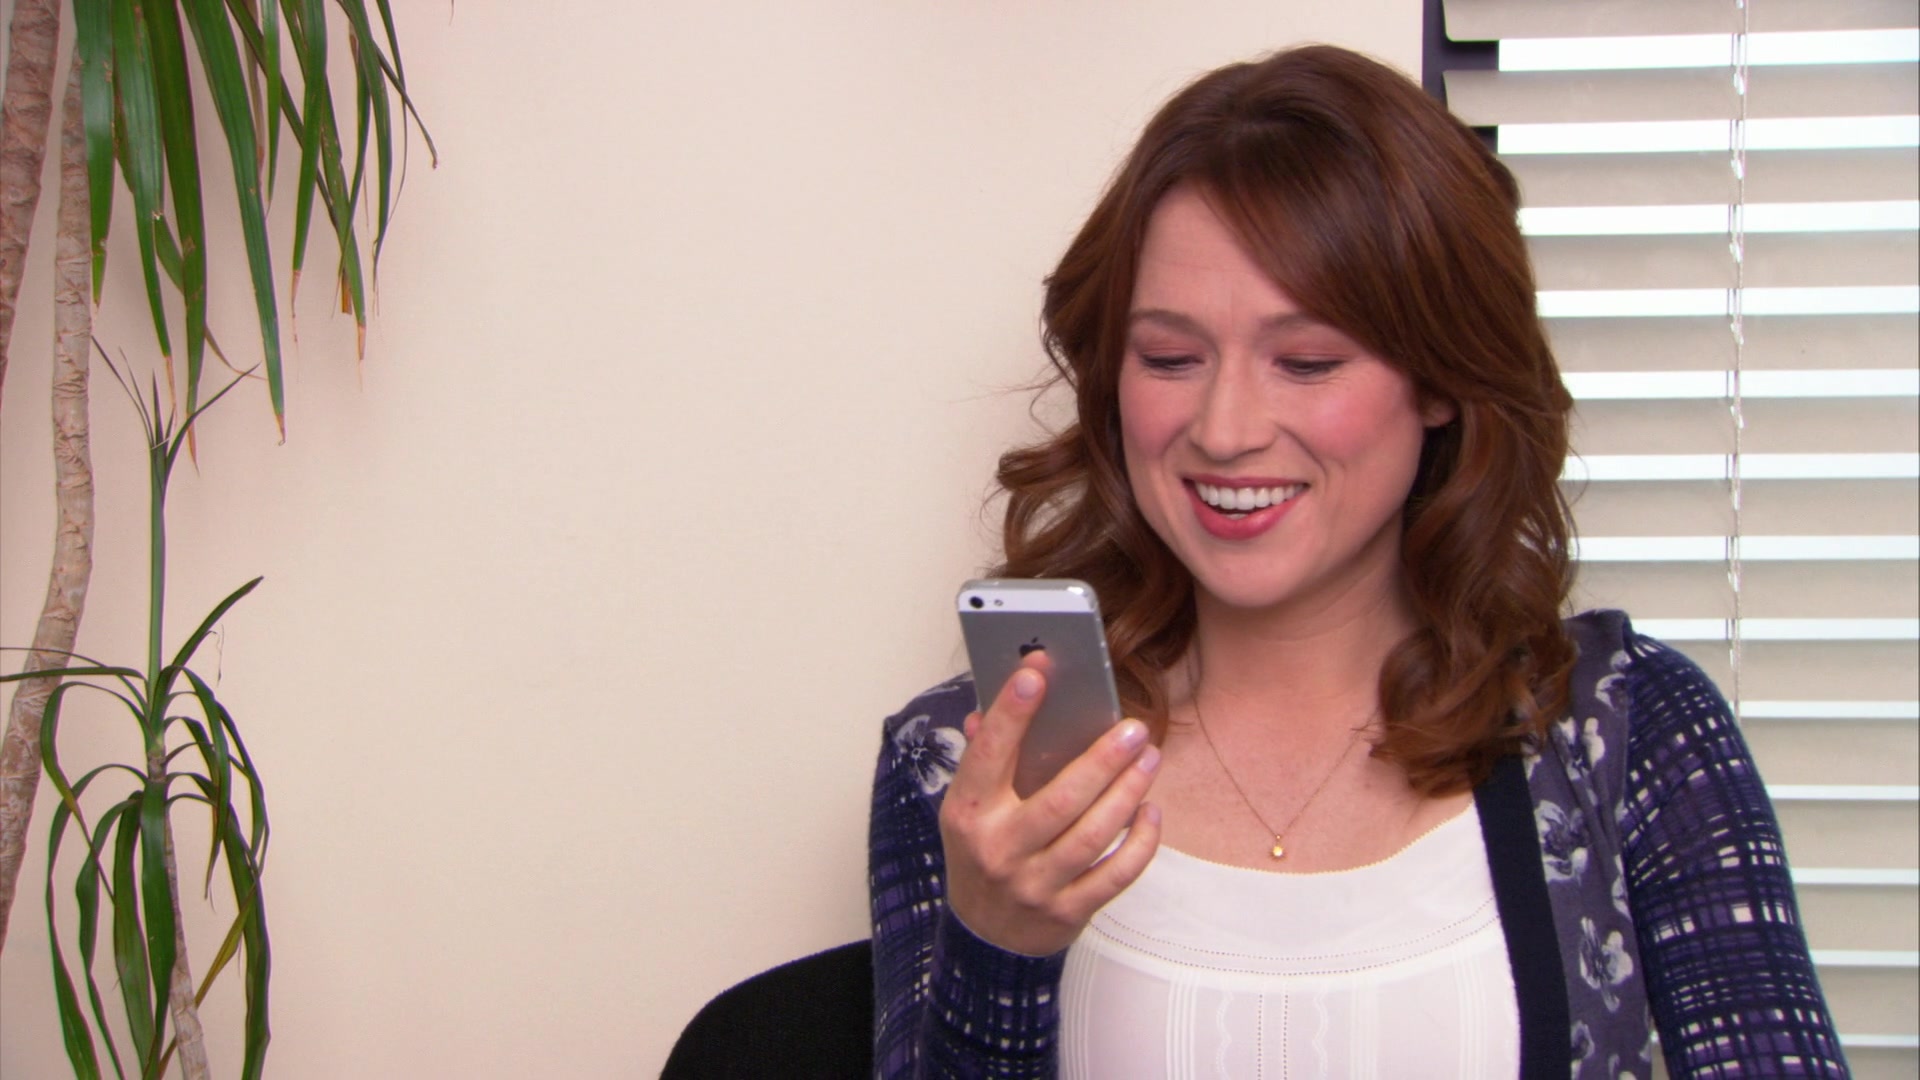 Apple iPhone Smartphone Used by Ellie Kemper (Erin Hannon) in The Office - ...